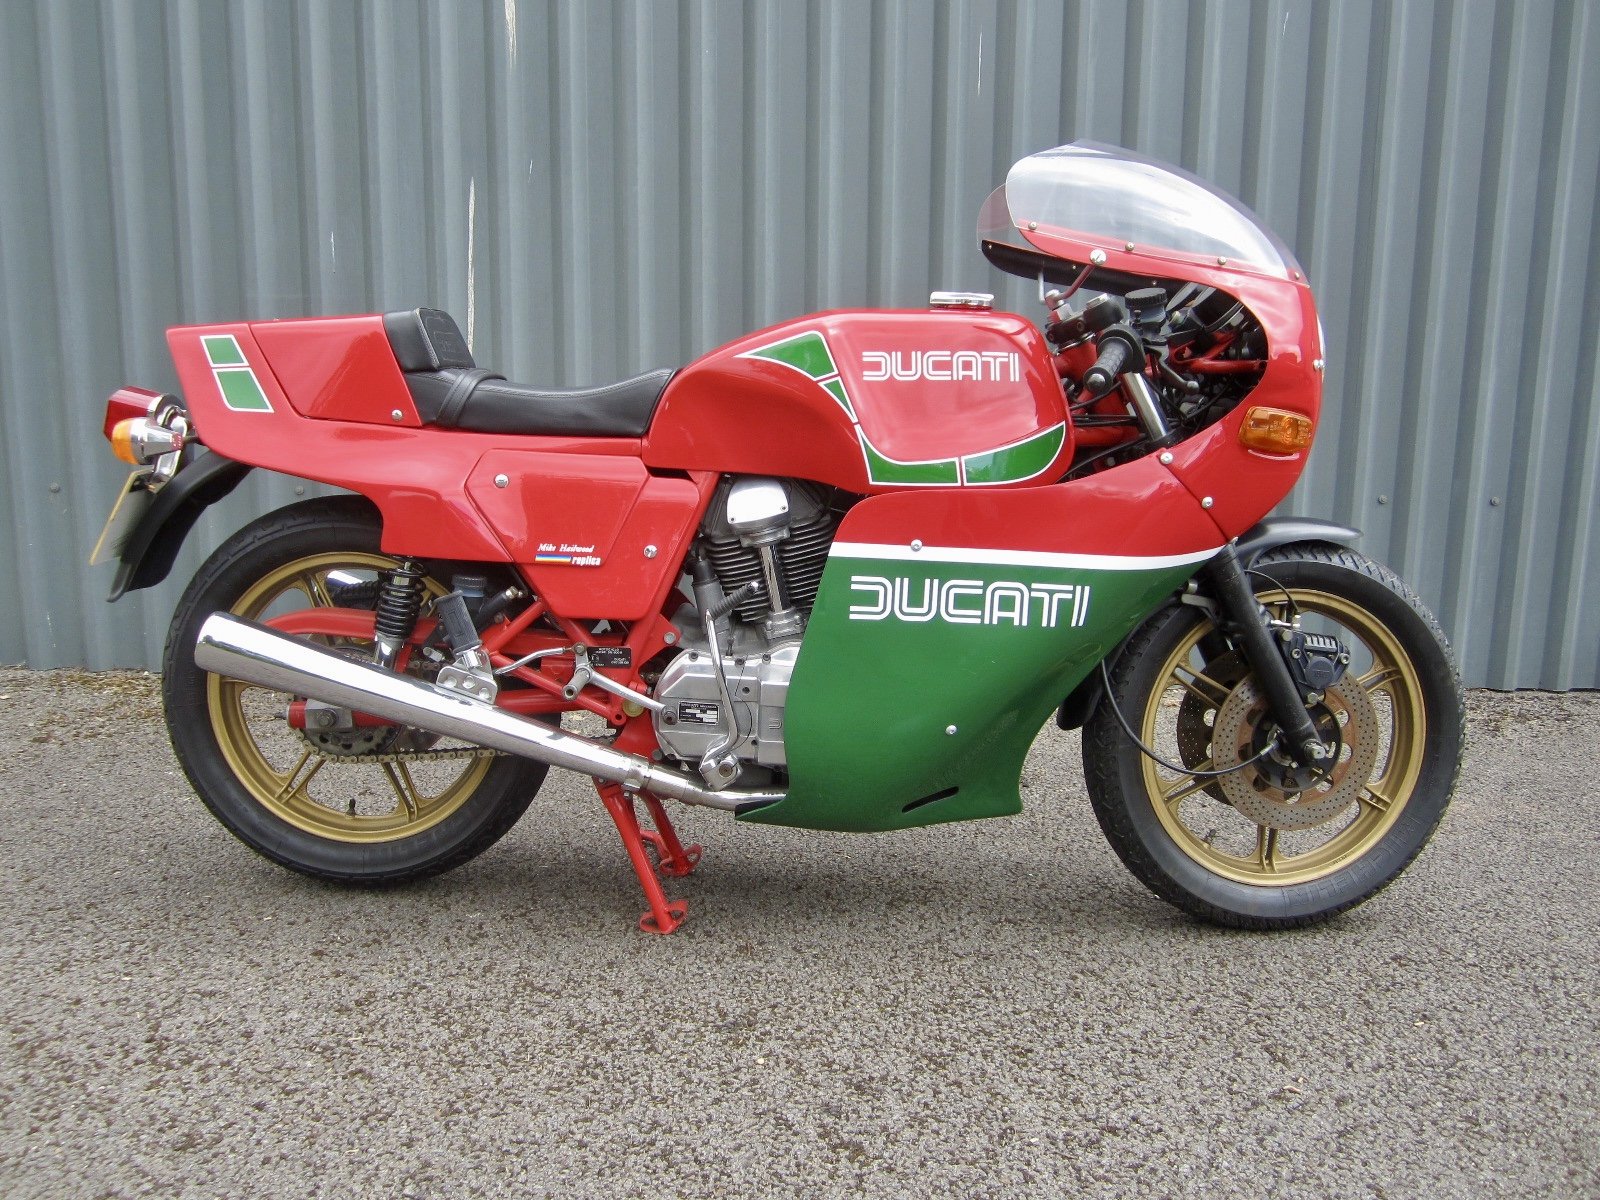 Supersport 900 SS MHR Mike Hailwood Replica